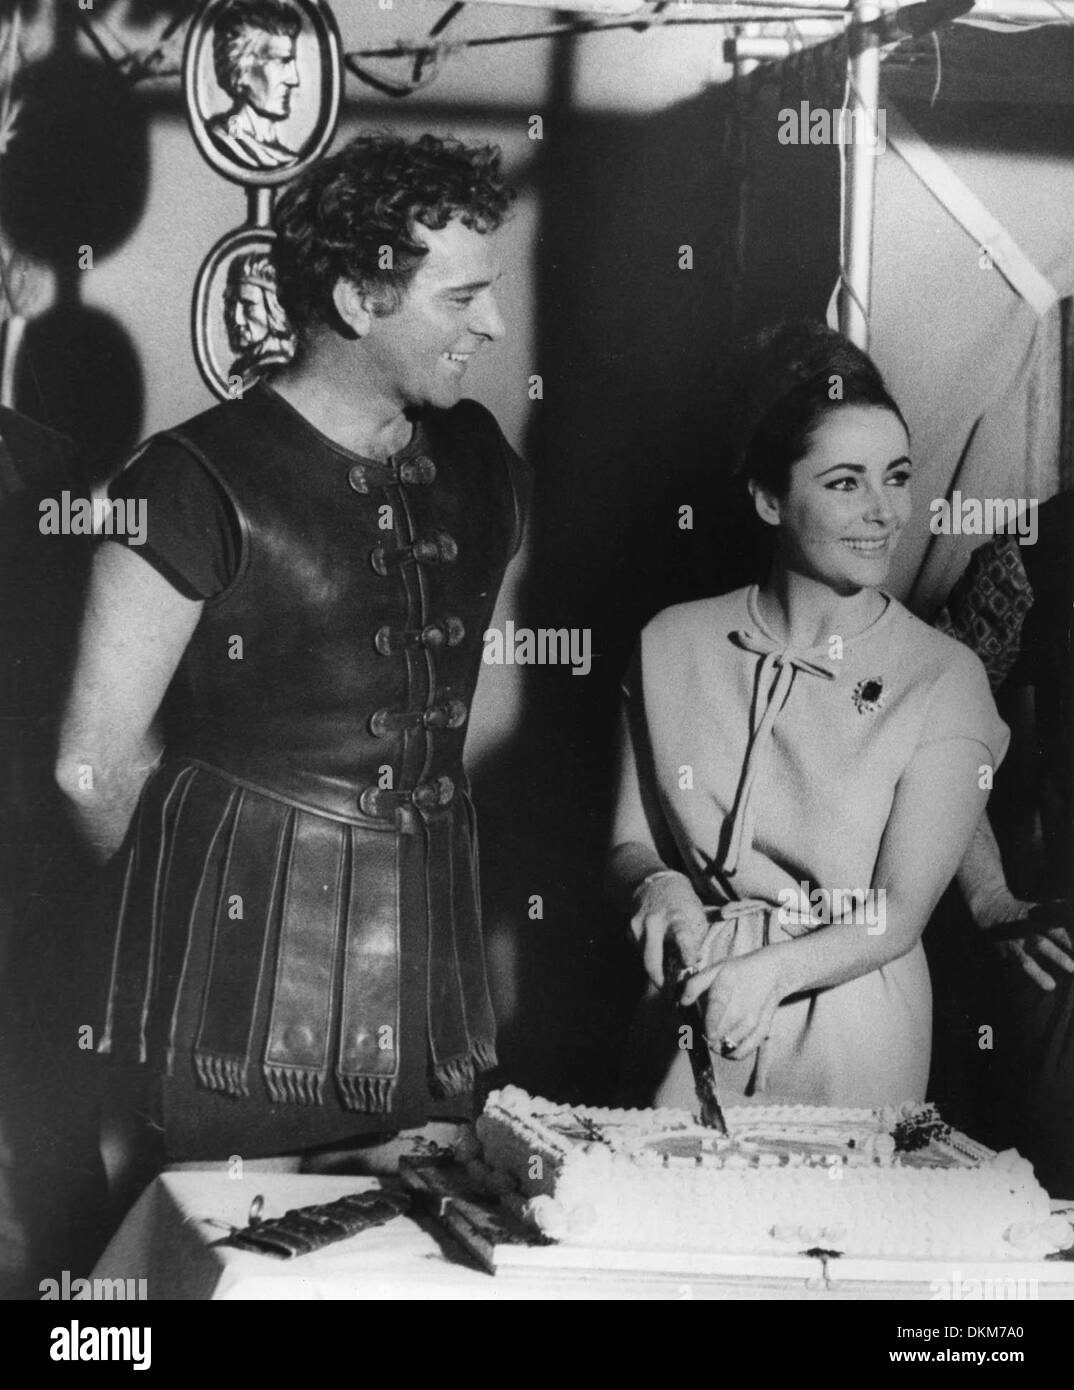 Feb. 28, 1963 - London, England, U.K. - Academy Award winning film legend ELIZABETH TAYLOR celebrated her 31st birthday at Pinewood Studios, with her husband RICHARD BURTON. PICTURED: Liz Taylor cuts the cake with a gladiator sword. (Credit Image: © KEYSTONE Pictures USA) Stock Photo